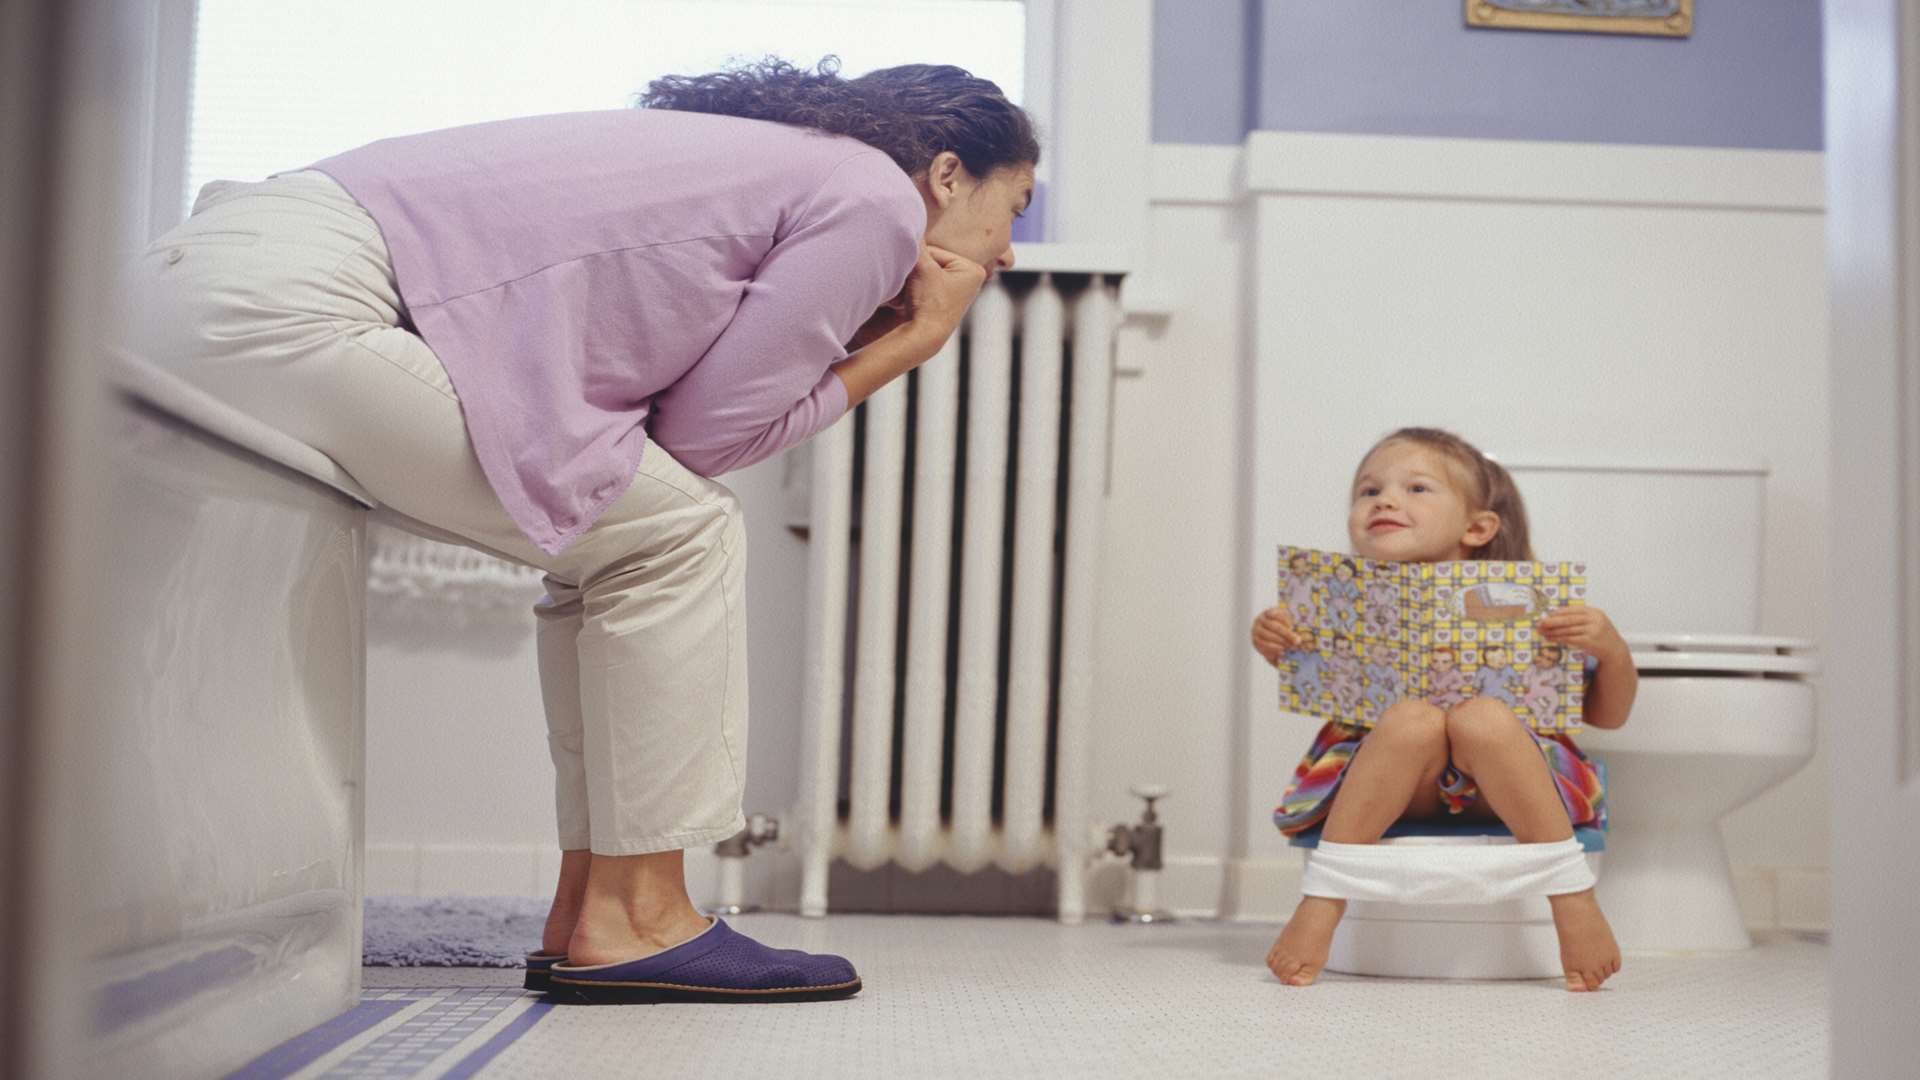 'There's no 'right time' to start potty training. What's important is picking the right way for you'